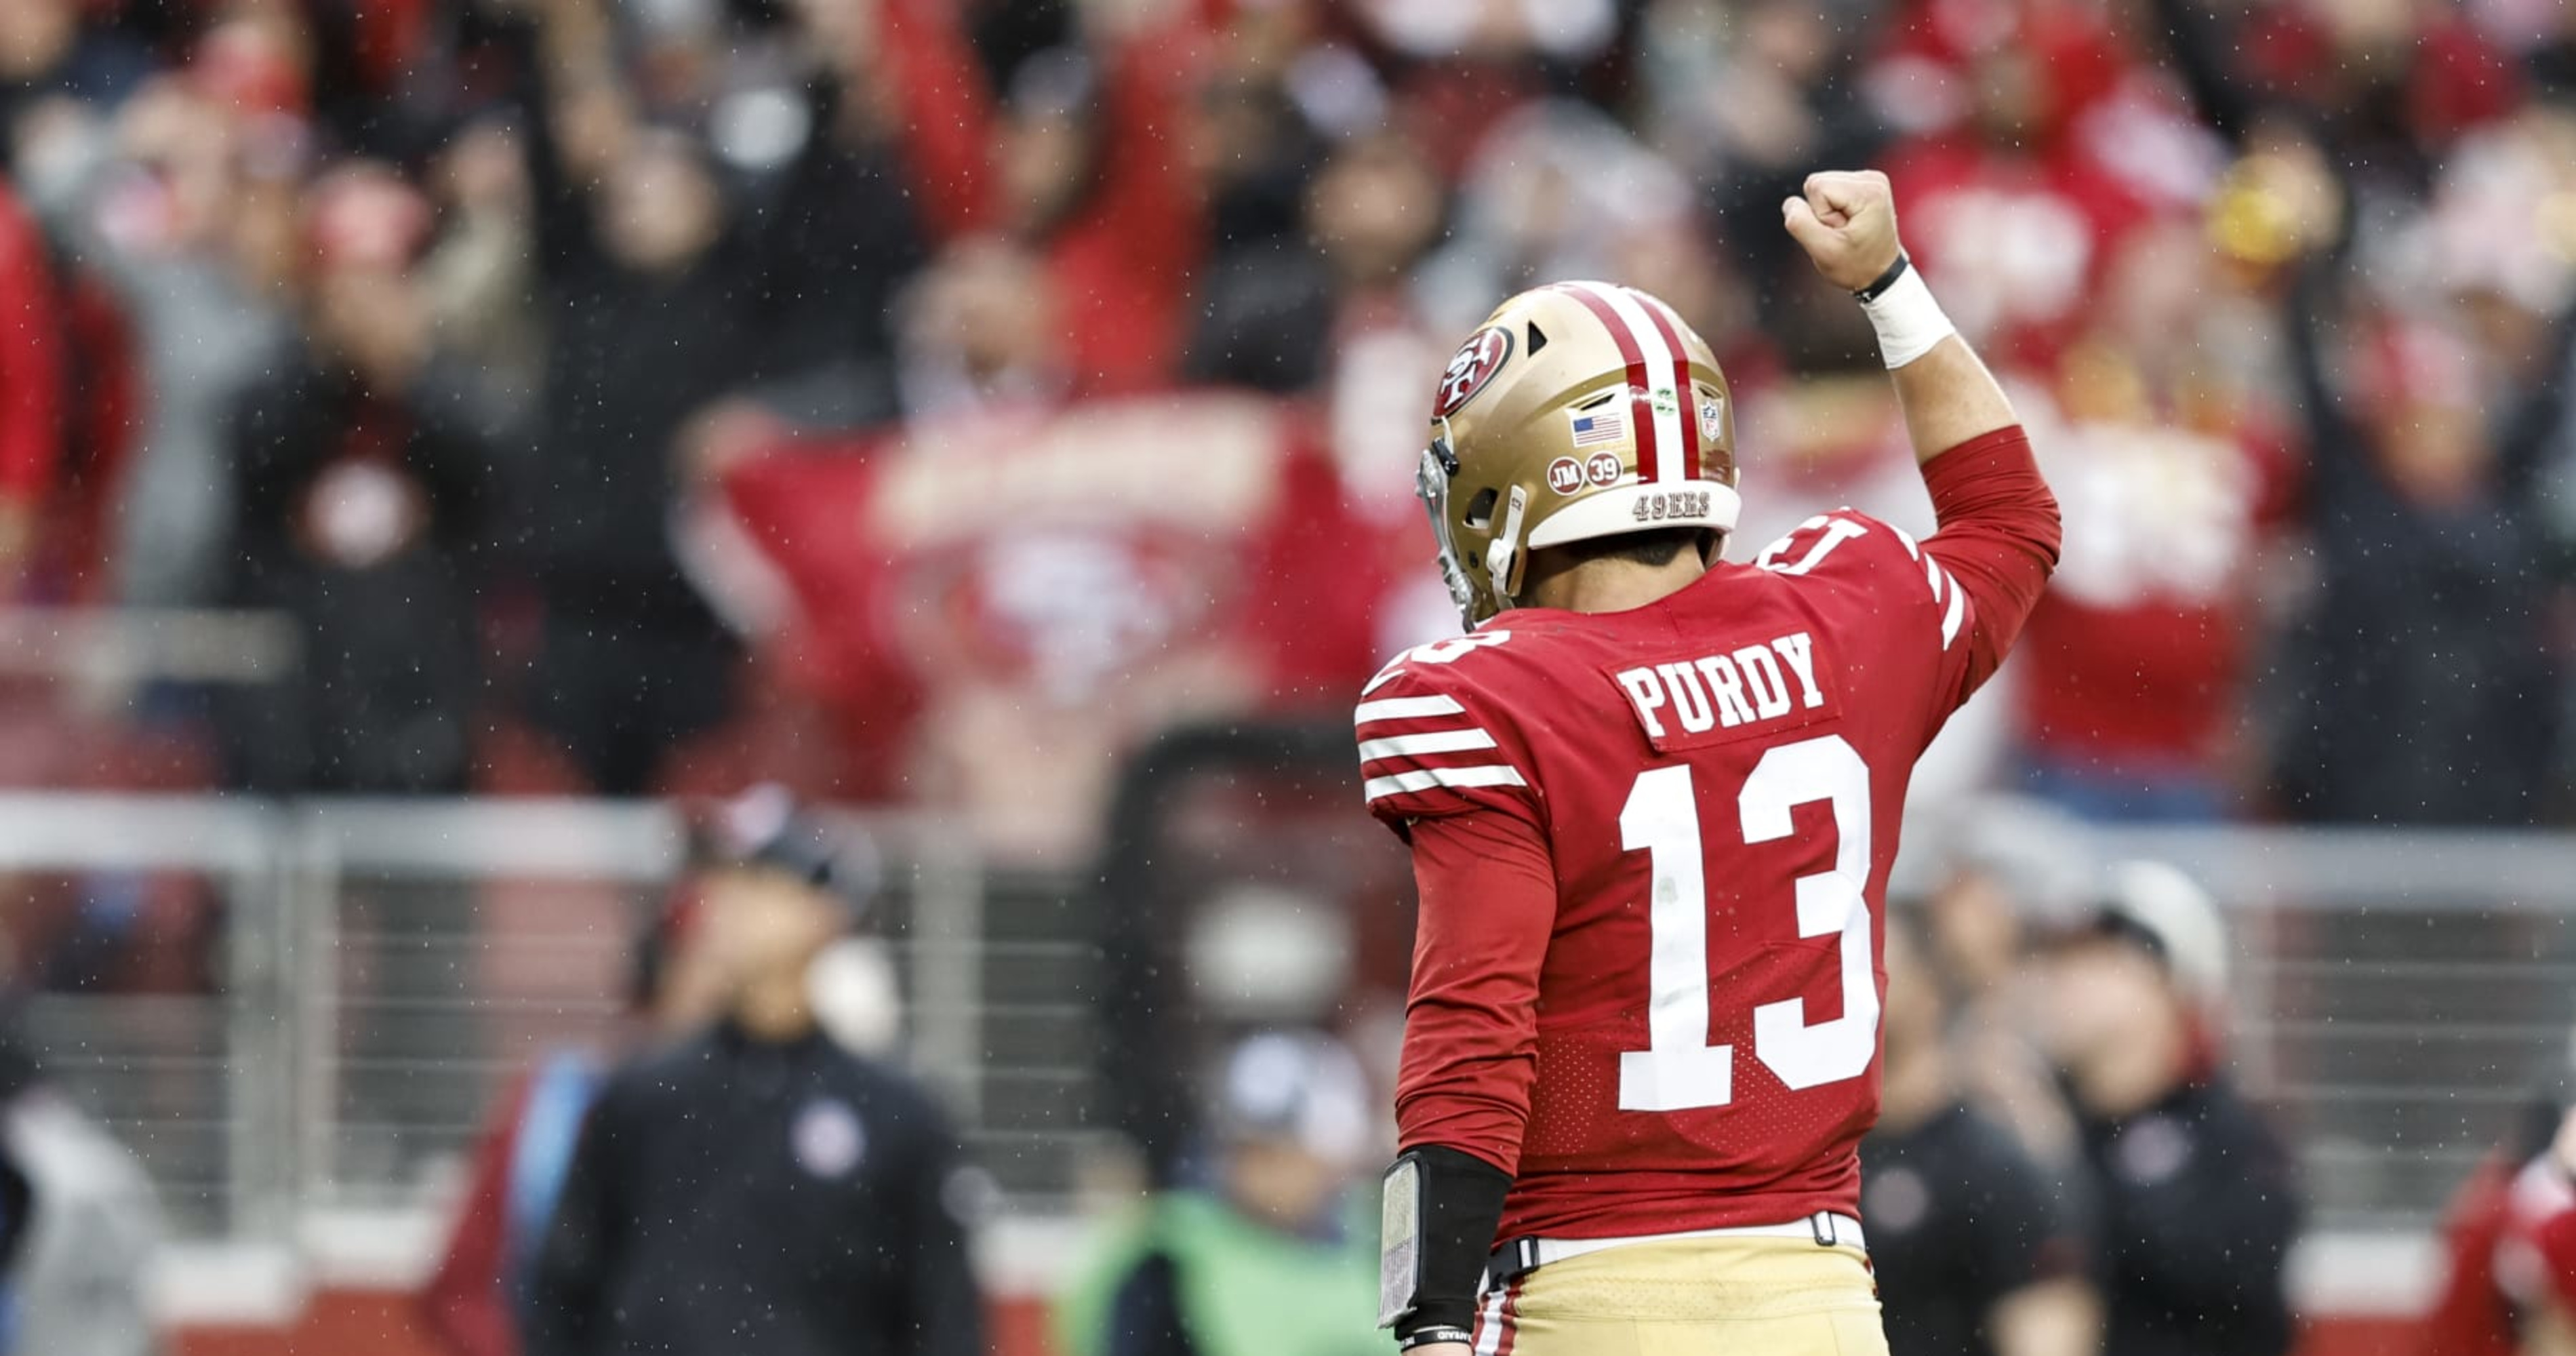 Padecky: Brock Purdy deserves a long look to be 49ers' starting QB